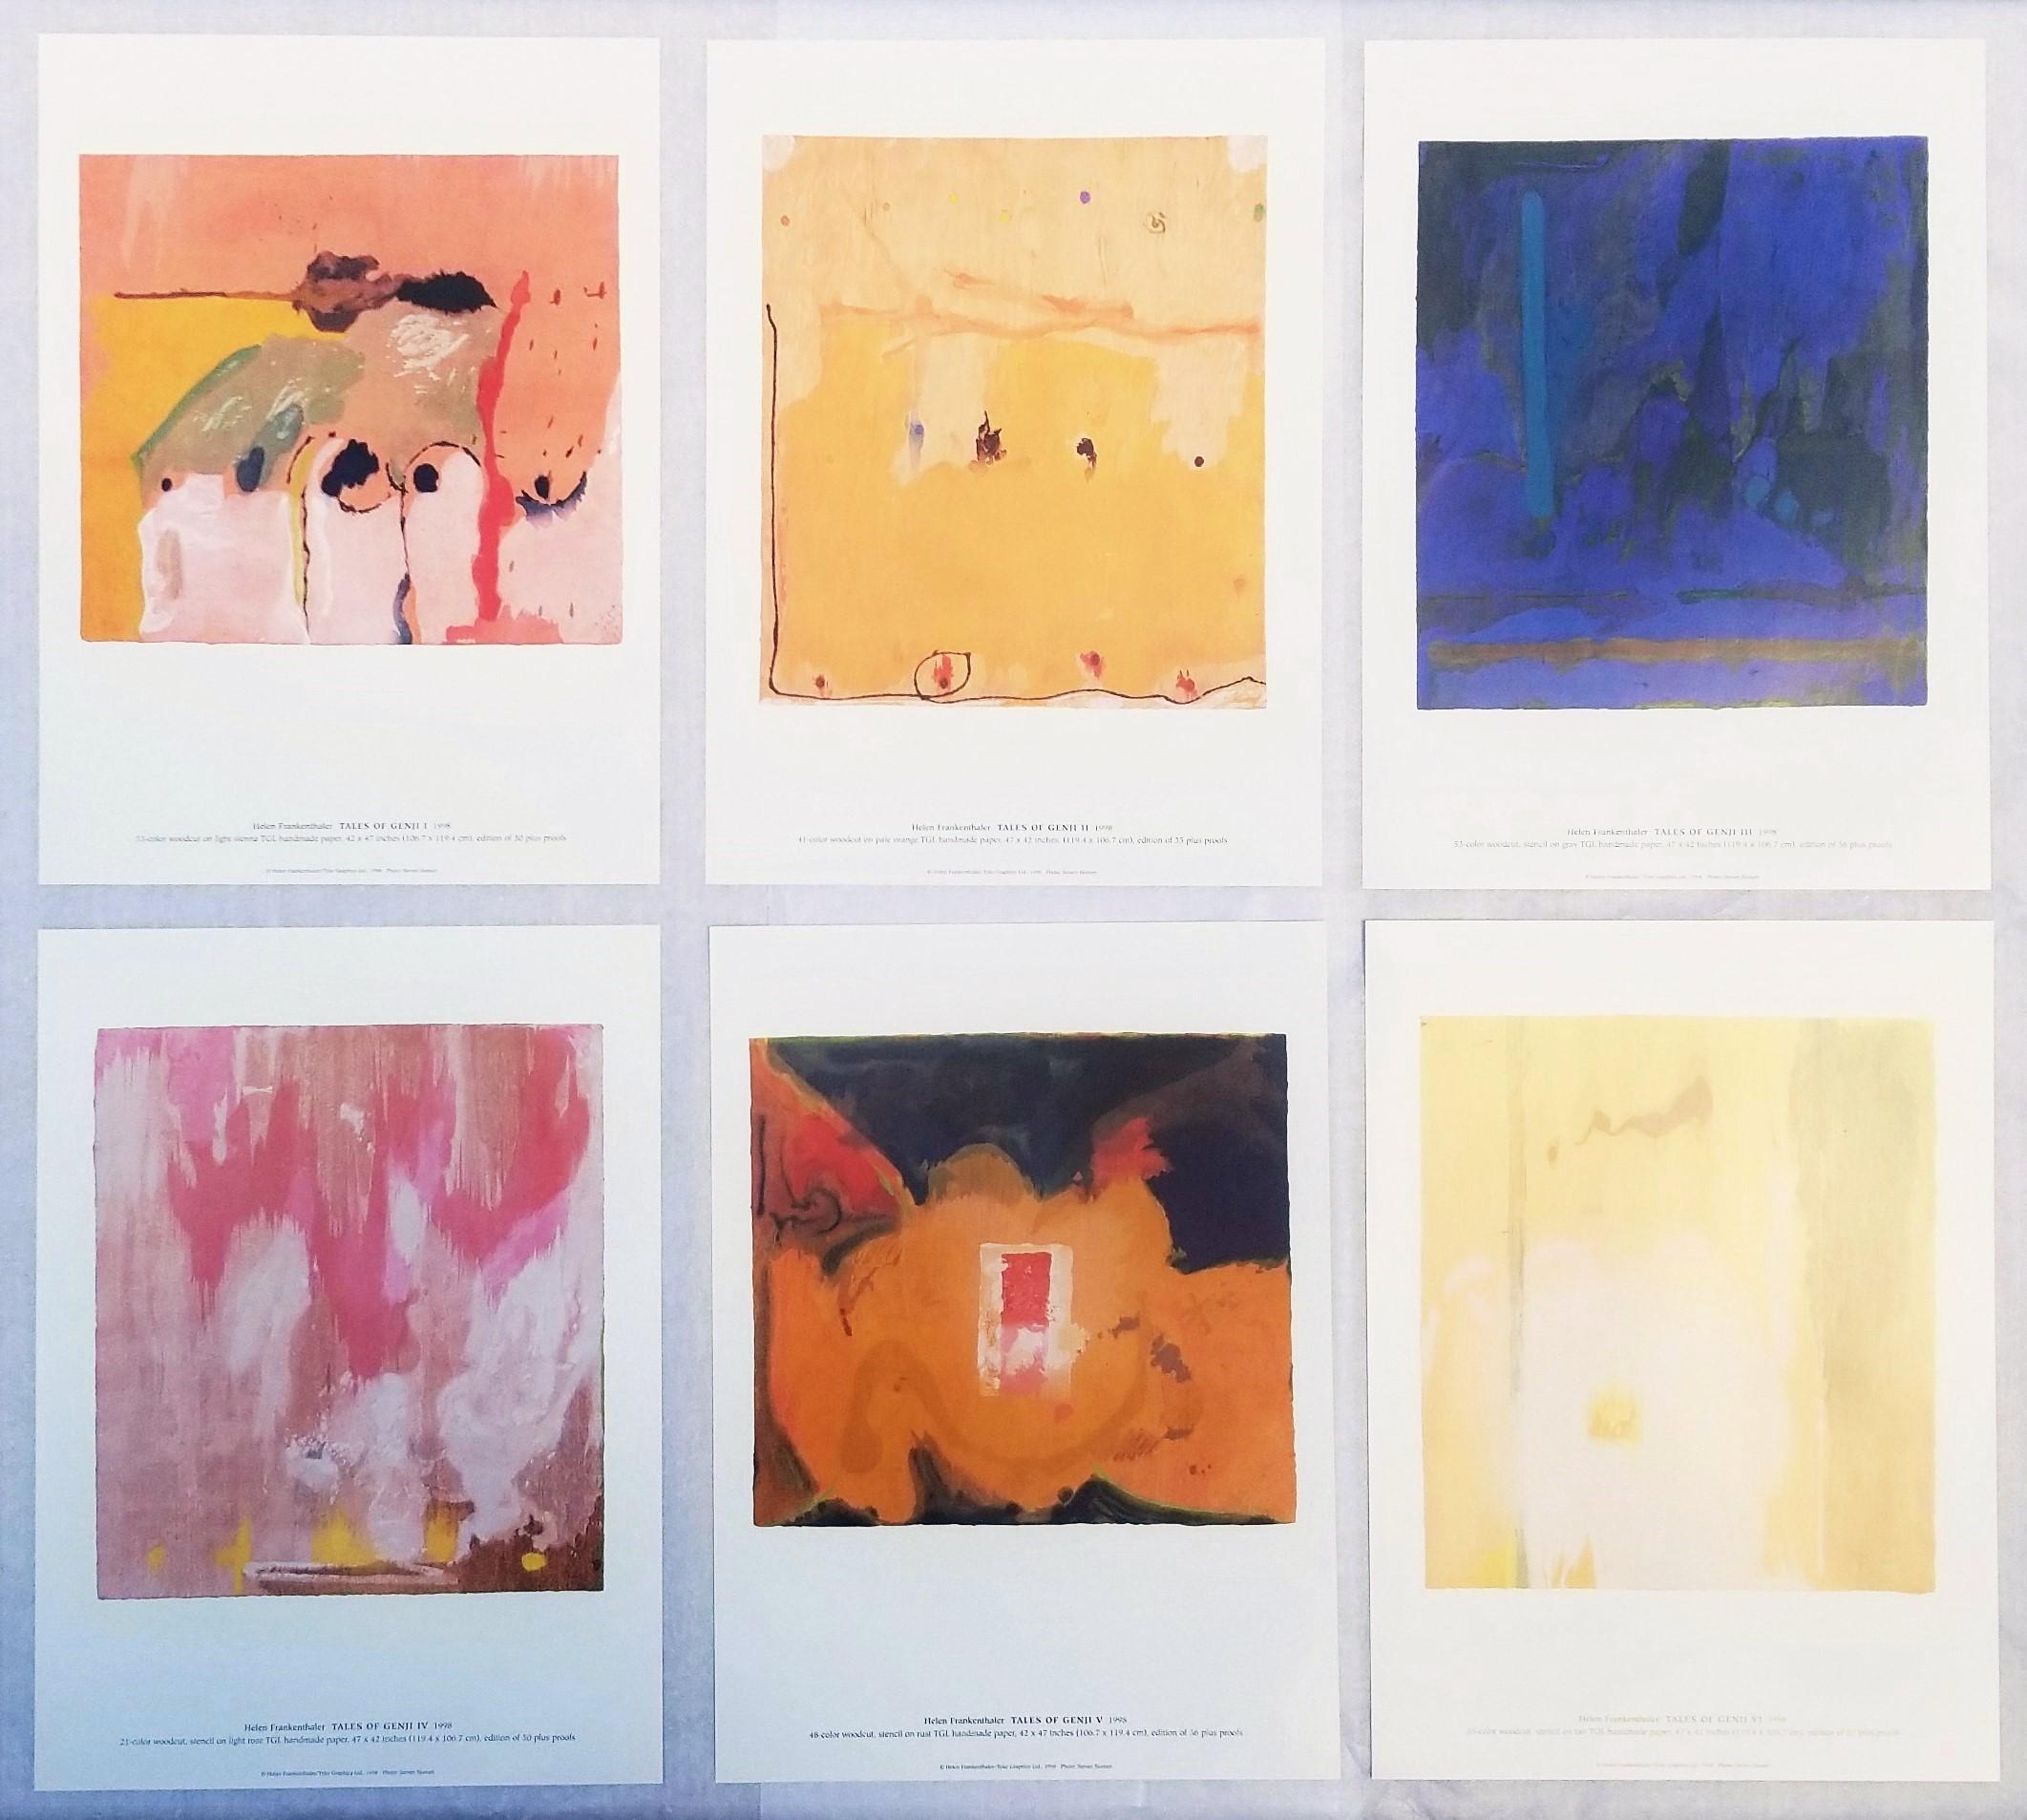 Artist: (after) Helen Frankenthaler (American, 1928-2011)
Title: "Helen Frankenthaler: Tales of Genji (Catalog of 6 Prints)"
Series: (after) Tales of Genji
*Issued unsigned
Year: 1998
Medium: The Complete Set of 6 Offset-Lithograph reproductions on